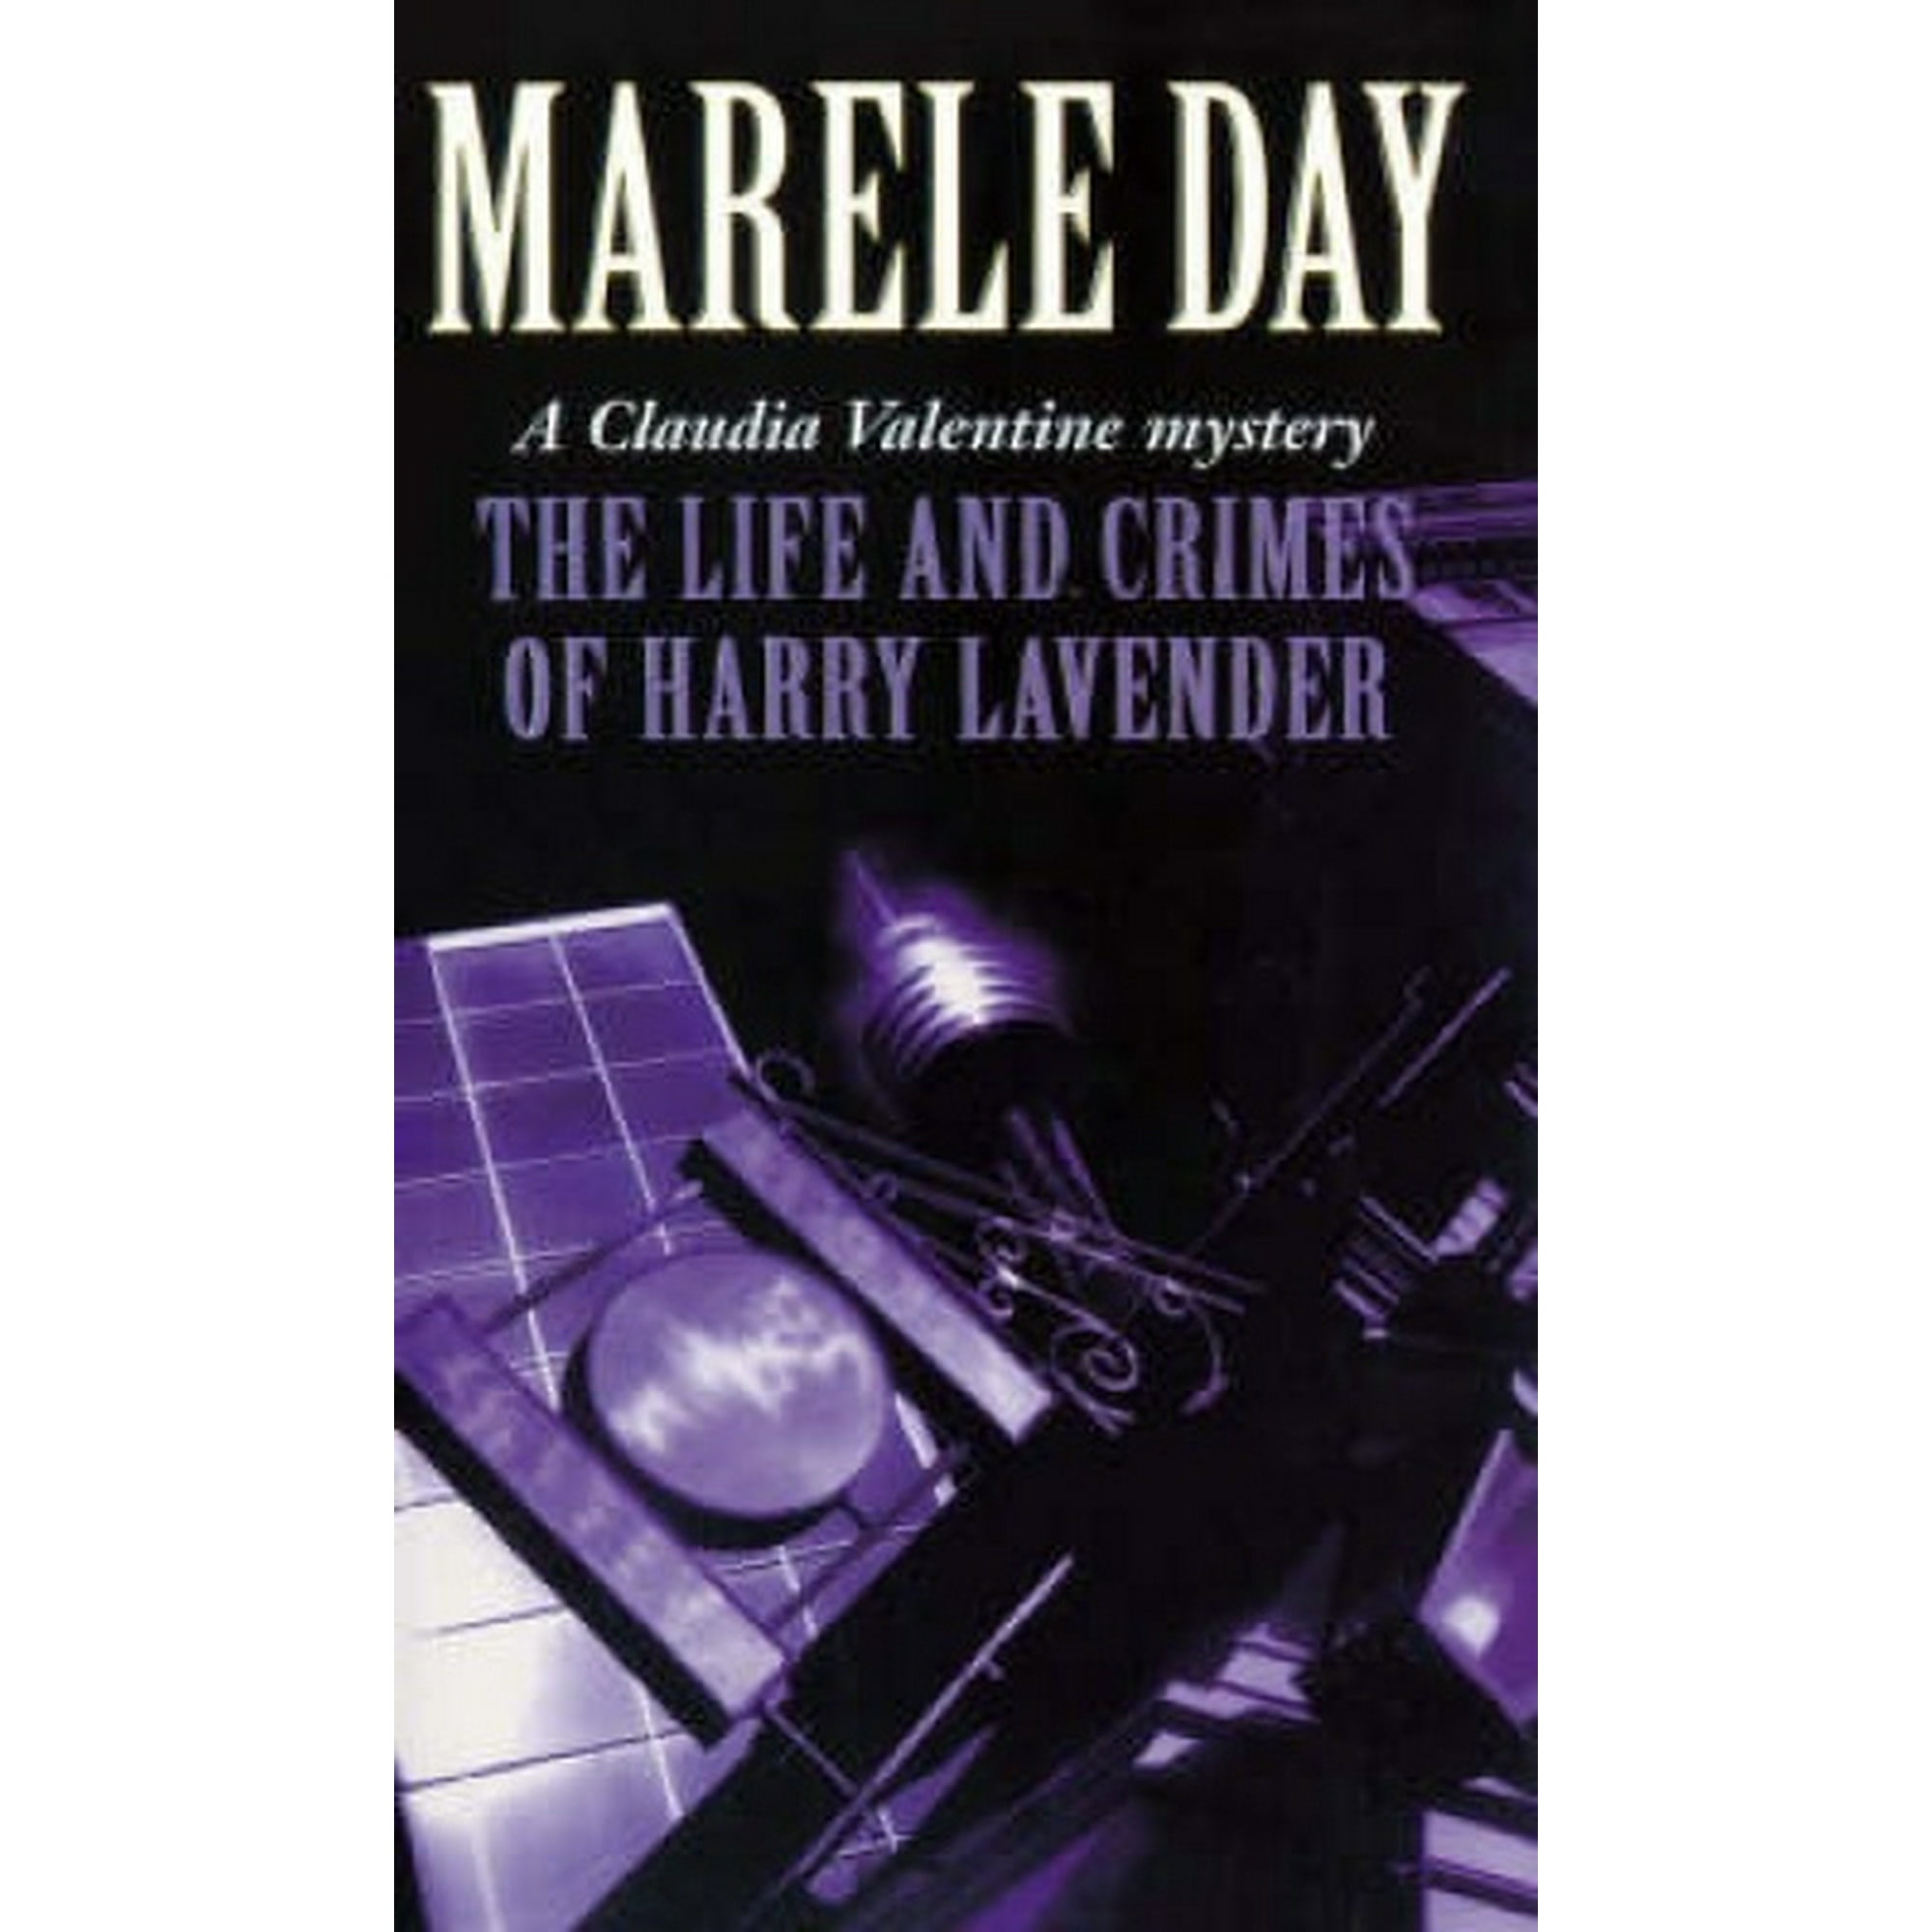 life and crimes of harry lavender